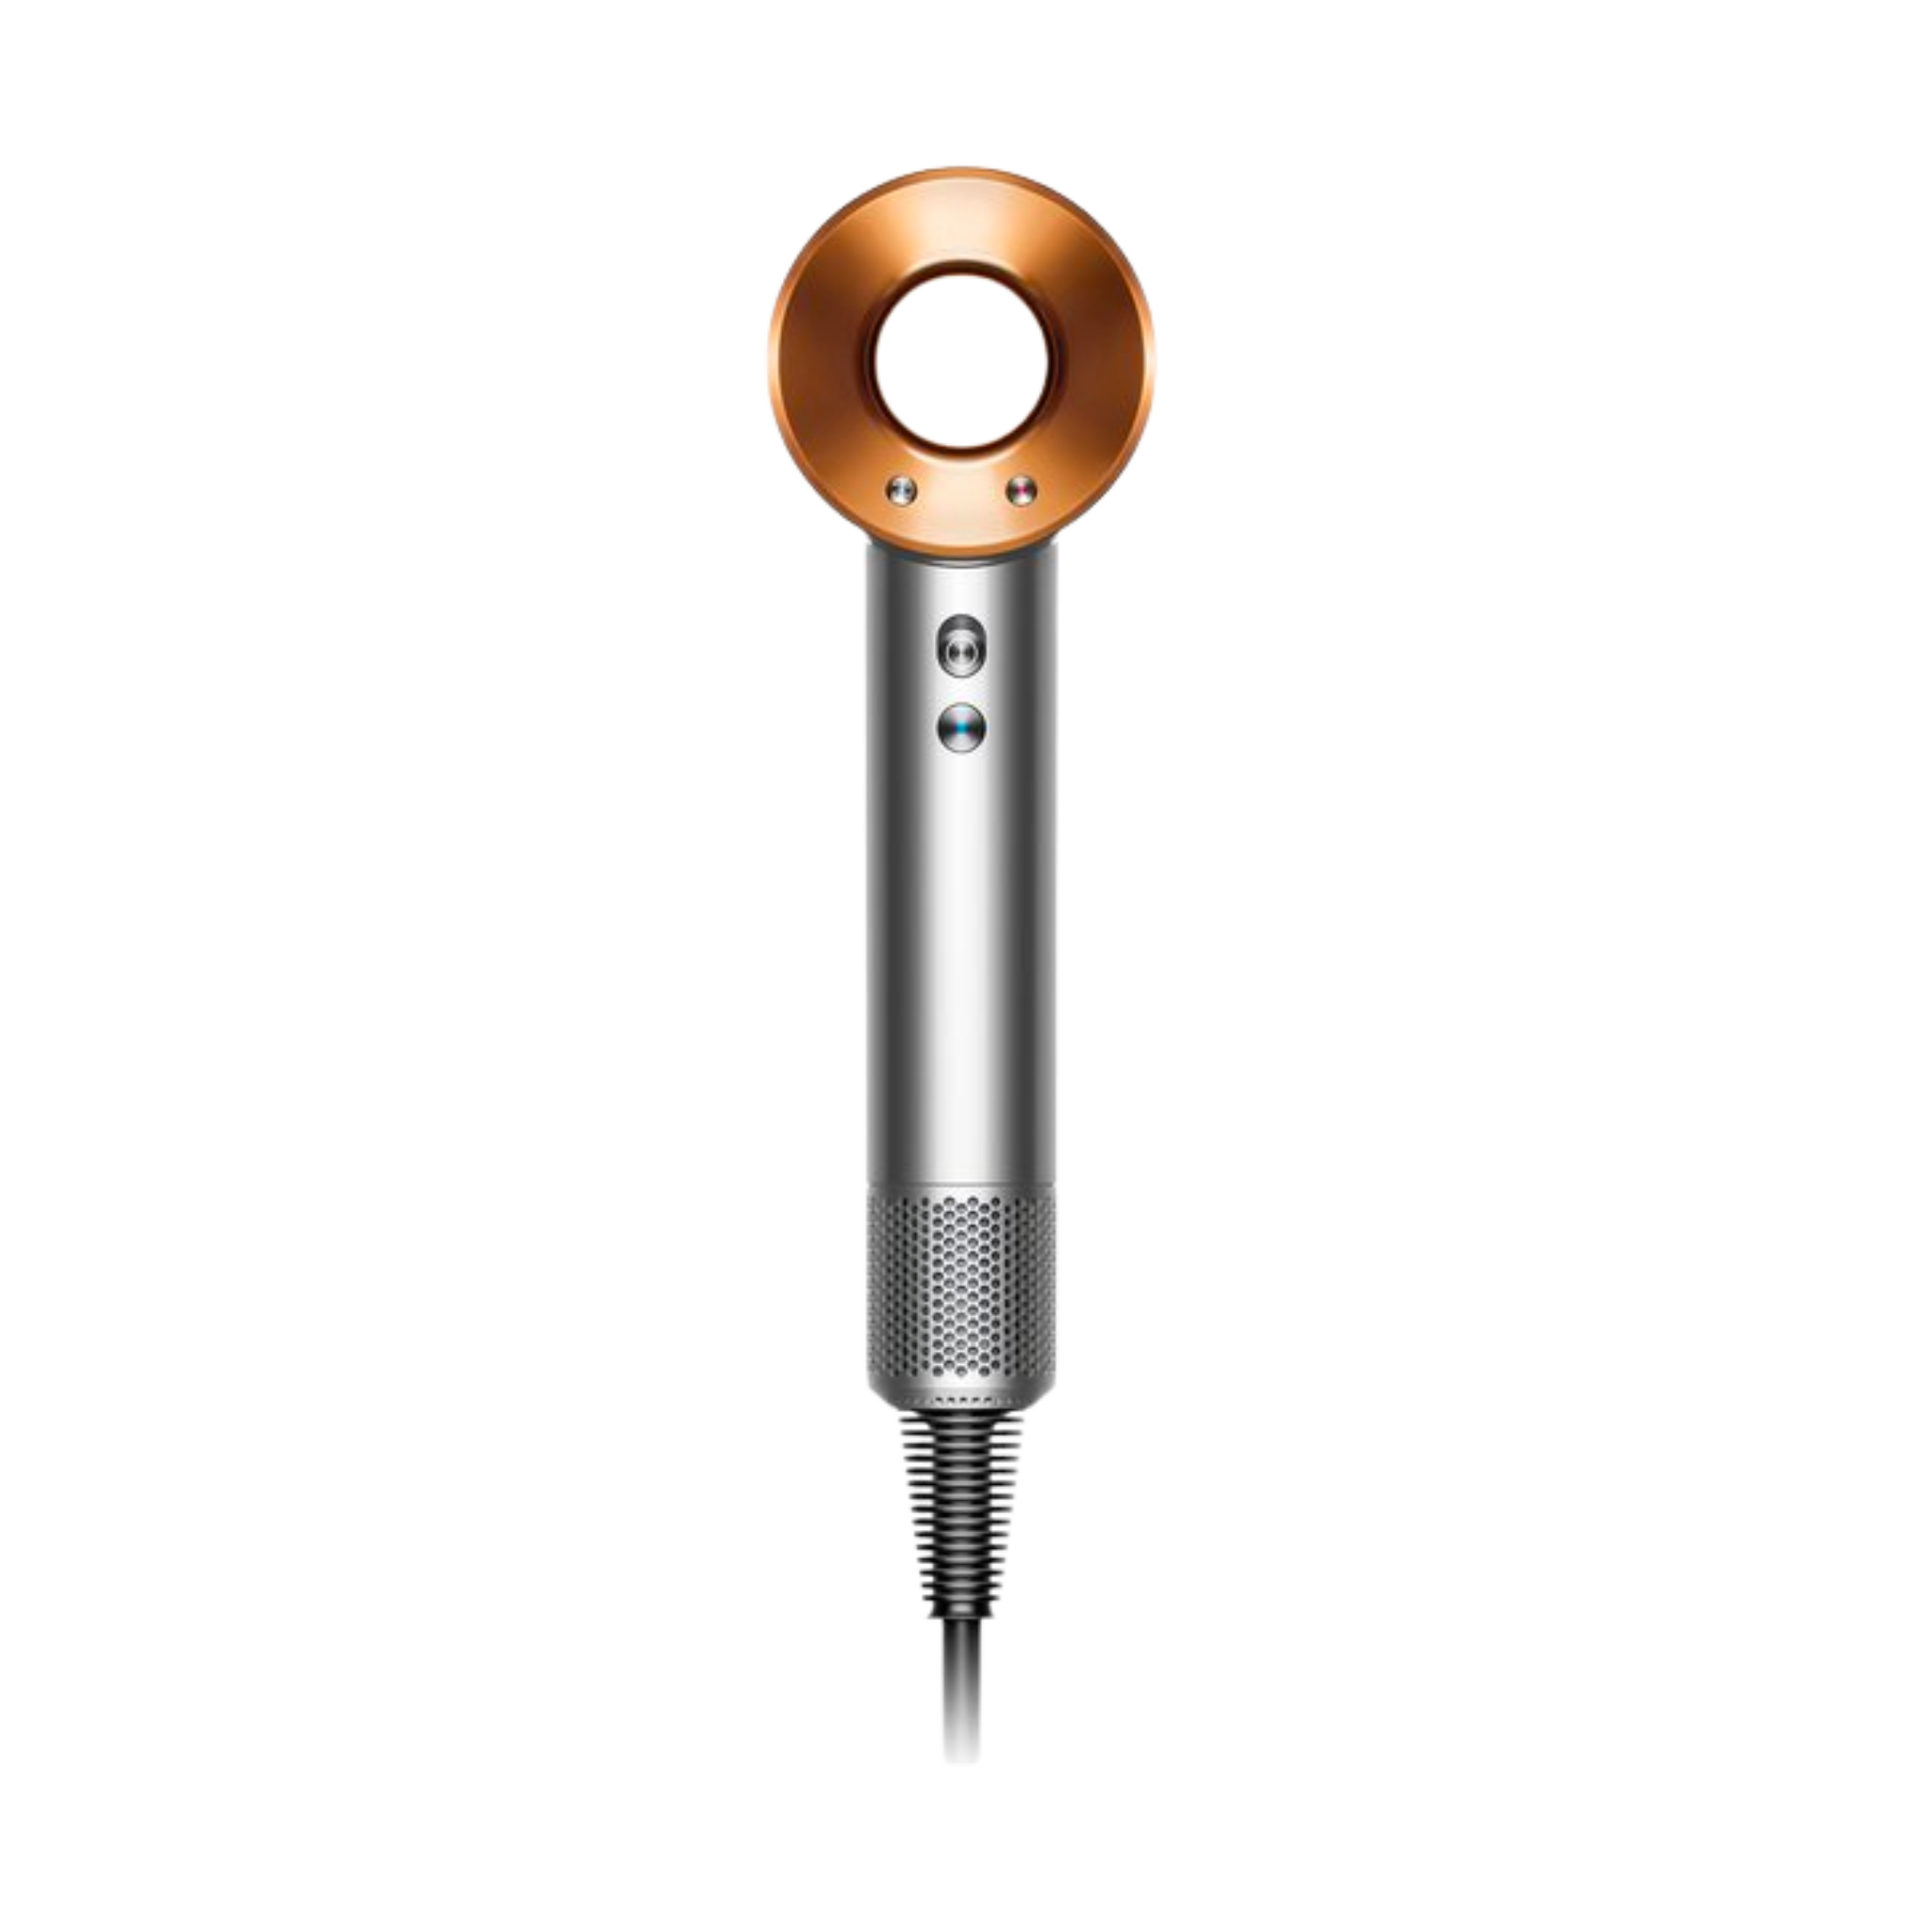 SUPERSONIC HAIR DRYER WITH 5 ATTACHMENTS (NICKEL/COPPER)